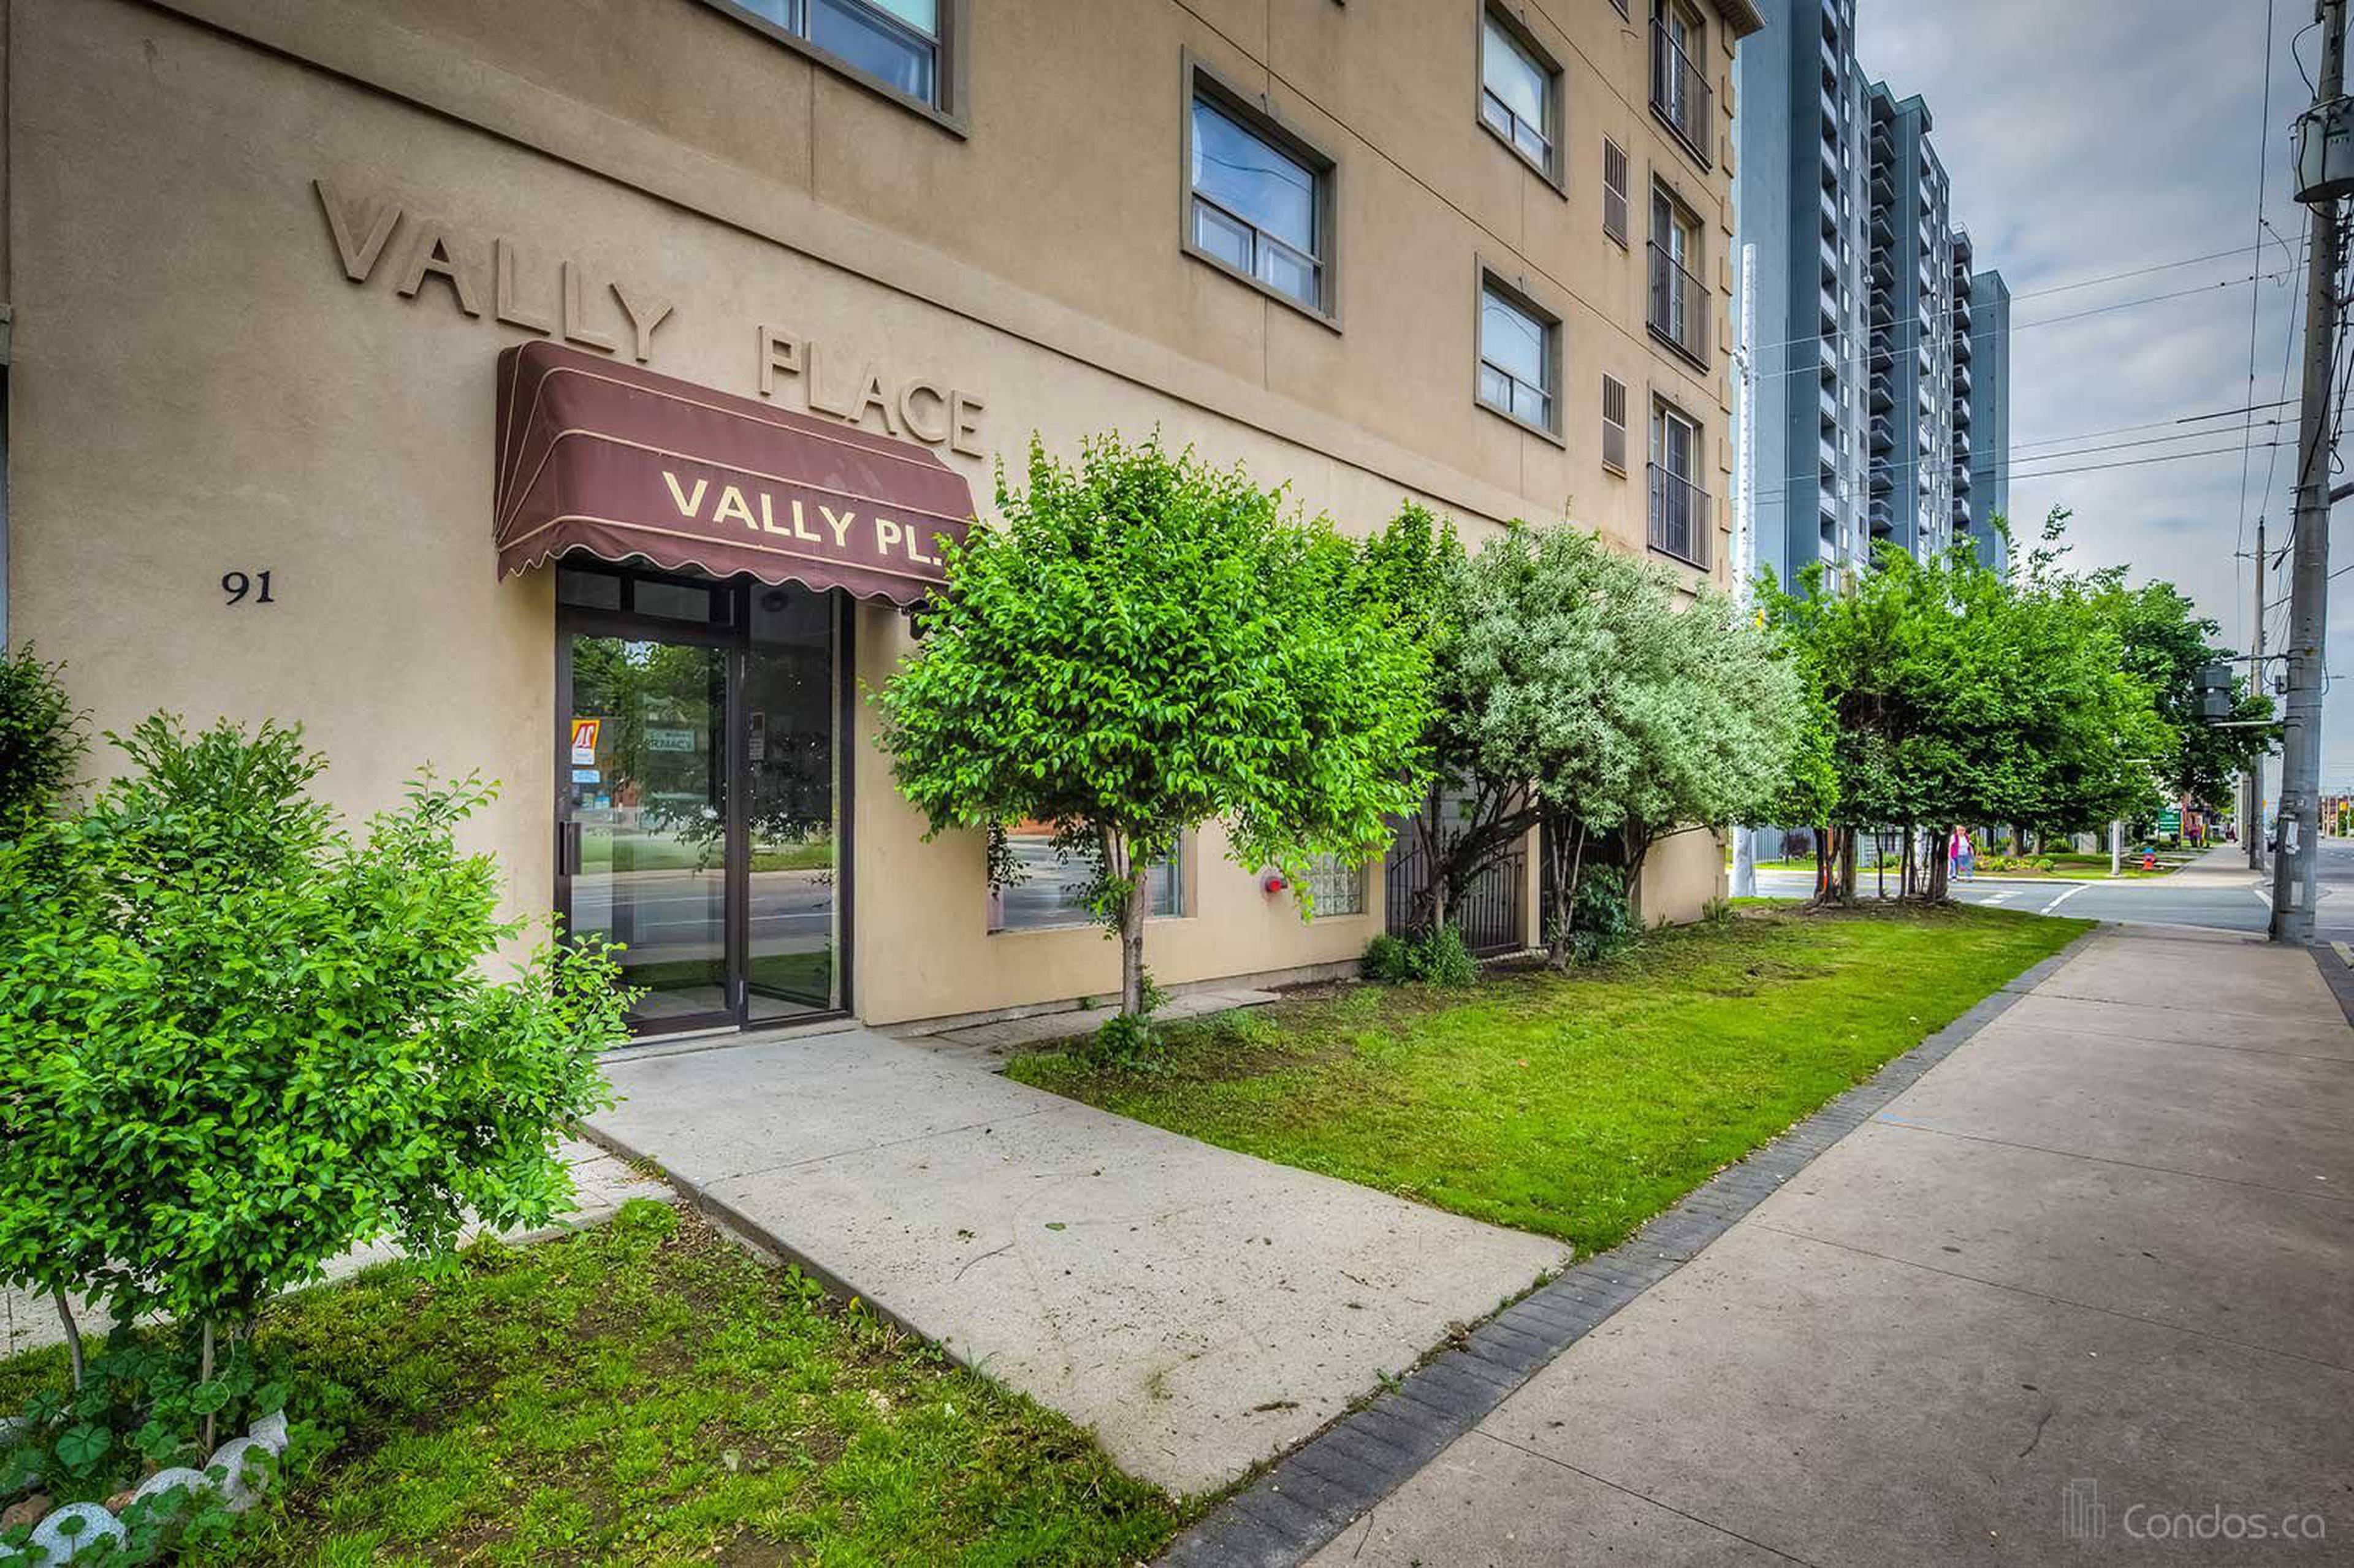 Vally Place Apartment Building